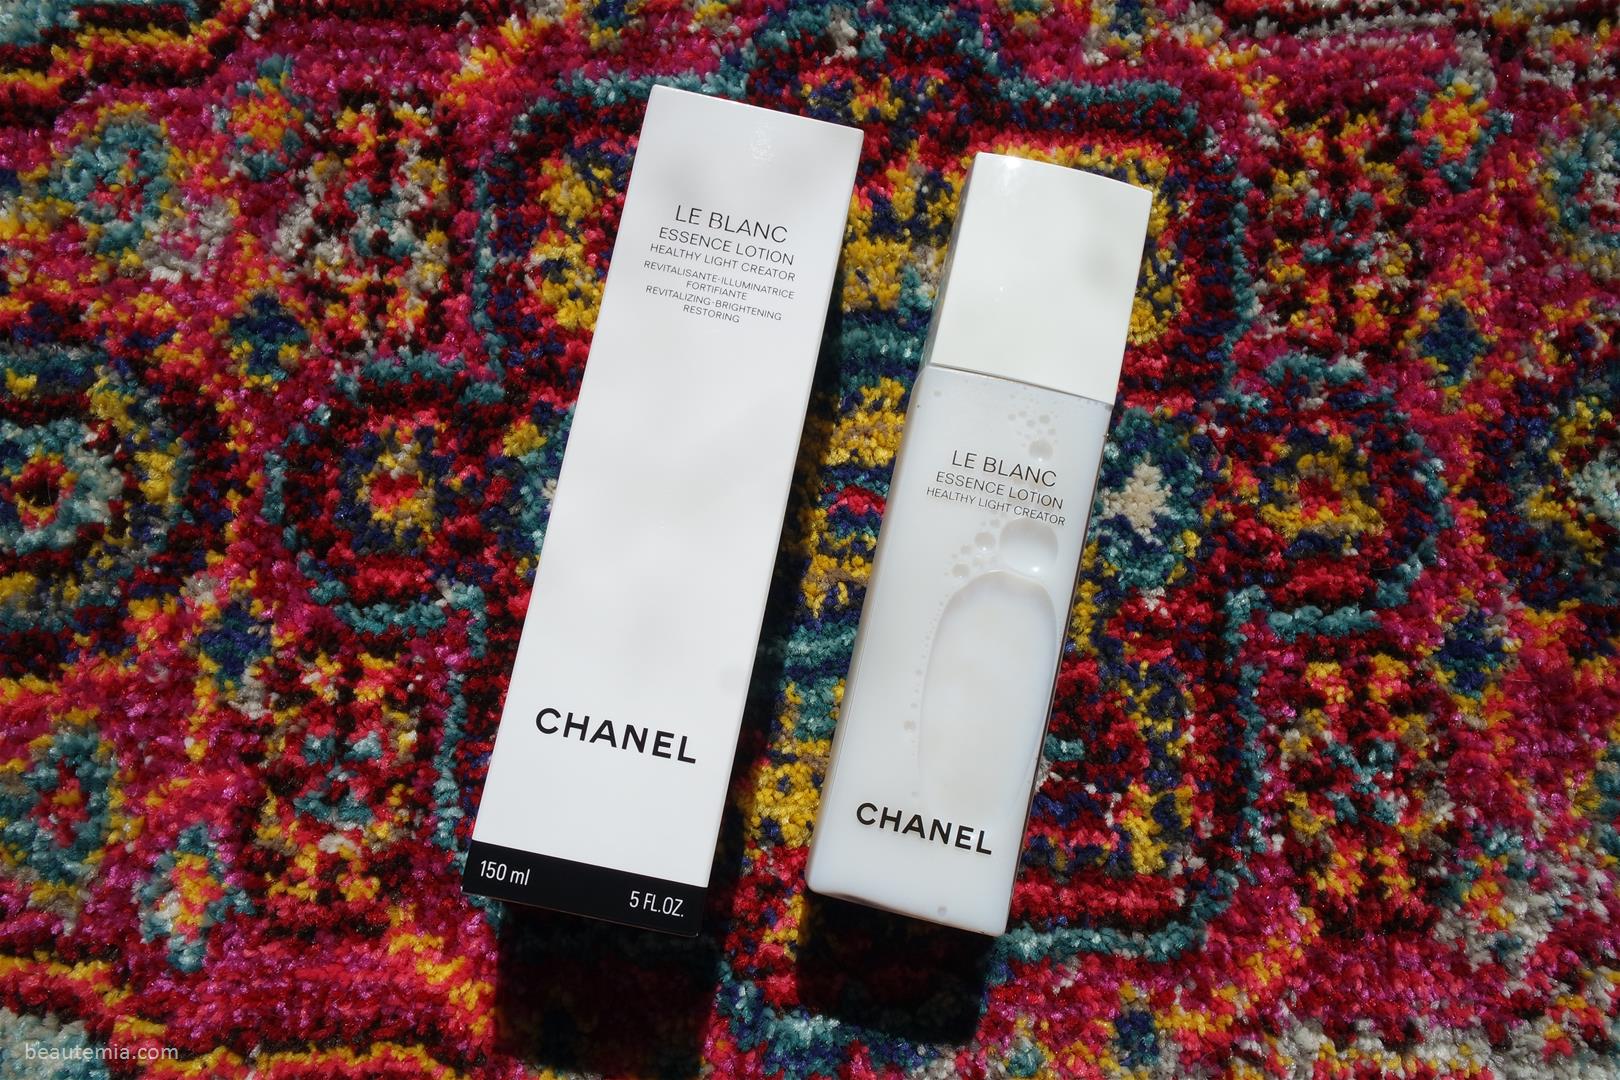 Chanel Review > Le Blanc Essence Lotion (Healthy Light Creator